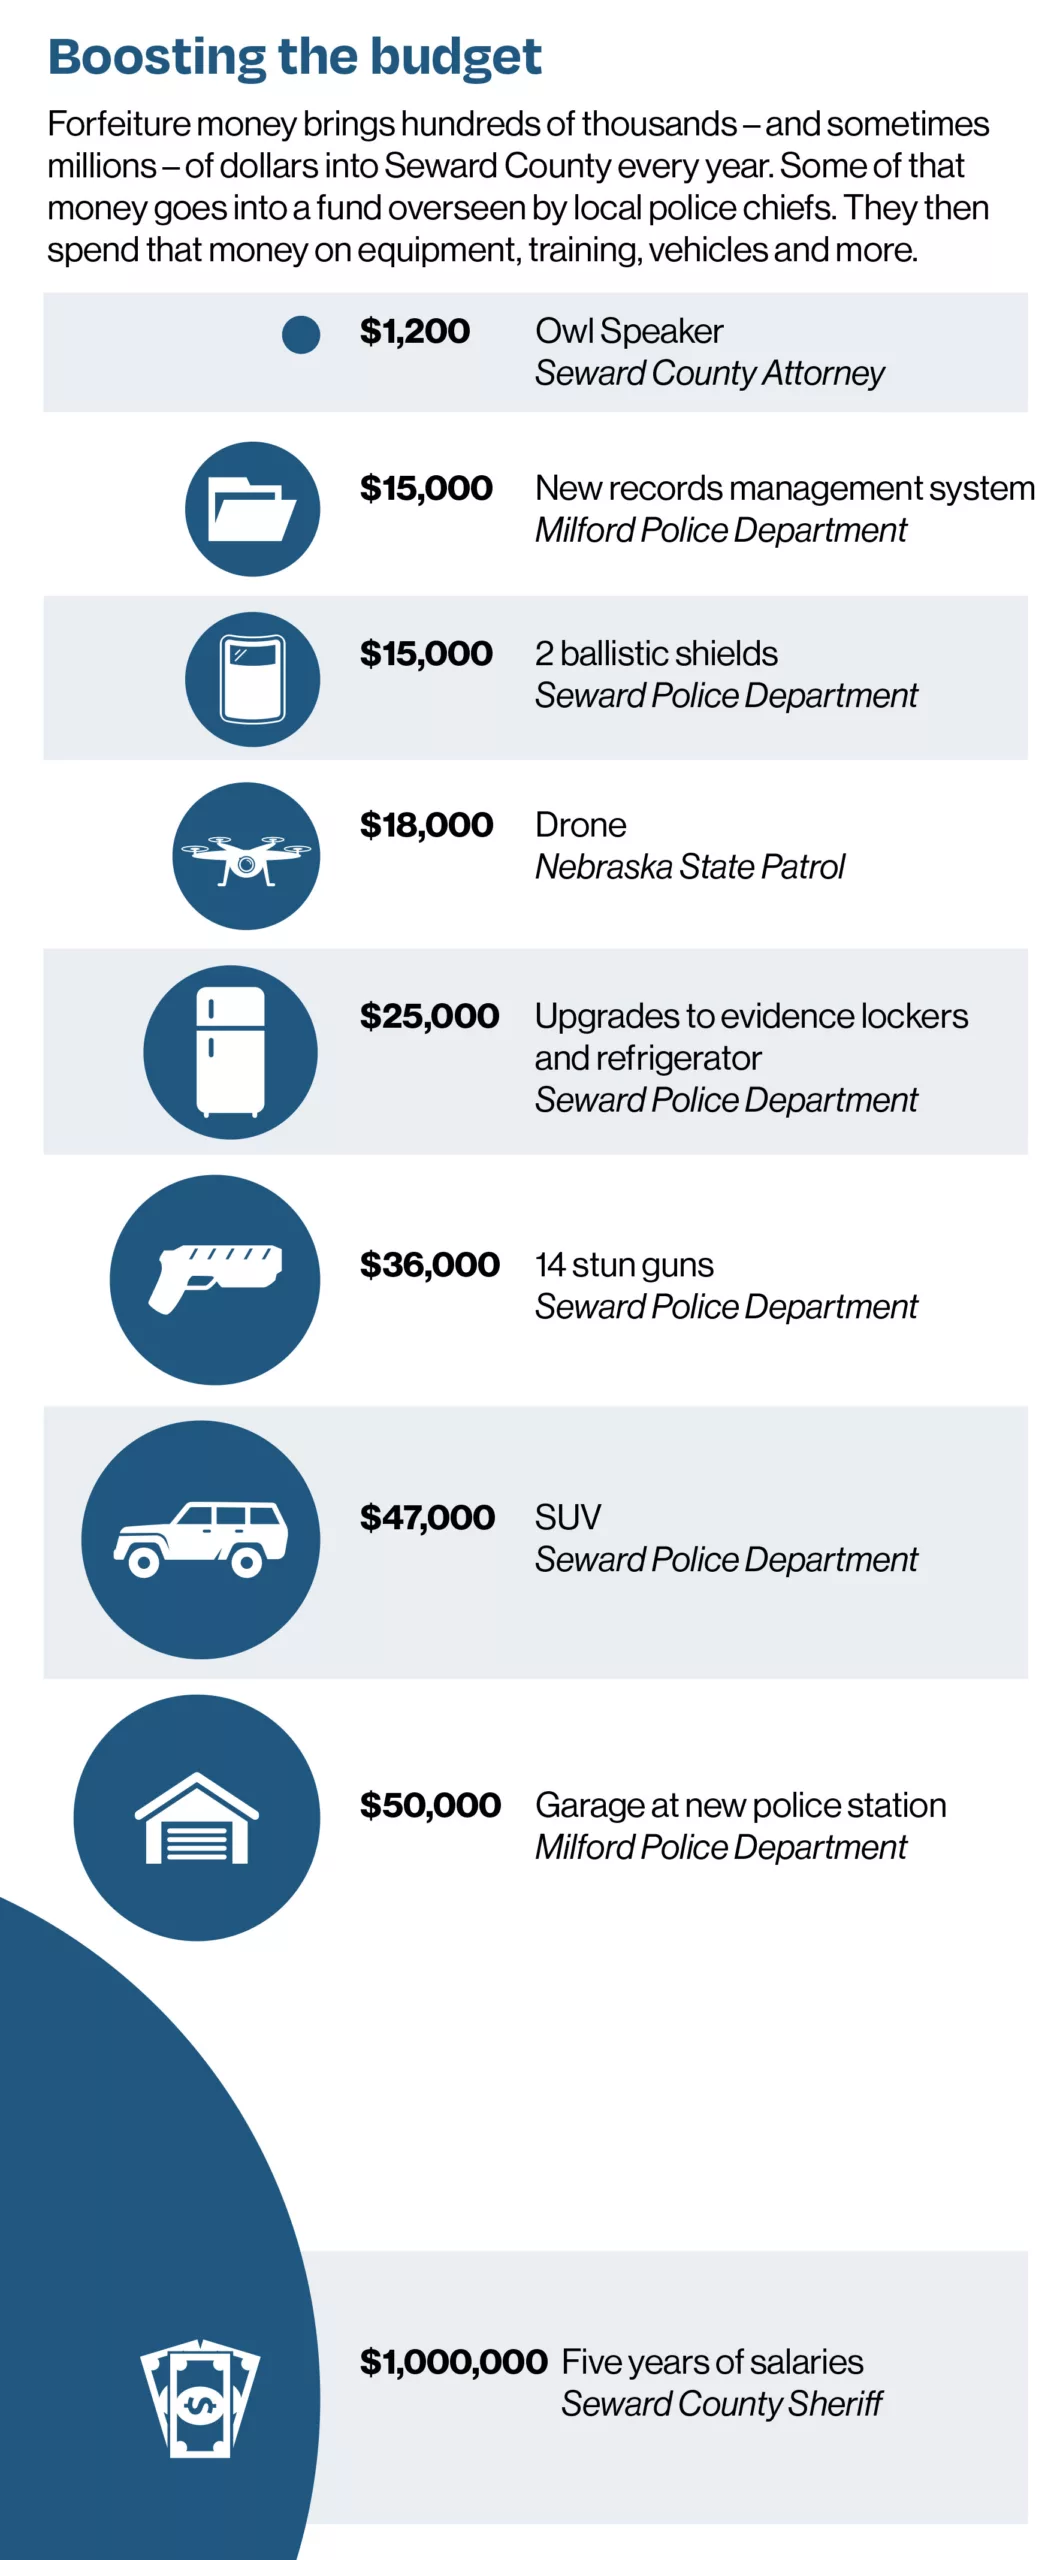 Boosting the budget - Forfeiture money brings hundreds of thousands — and sometimes millions — of dollars into Seward County every year. Some of that money goes into a fund overseen by local police chiefs. They then spend that money on equipment, training, vehicles and more.